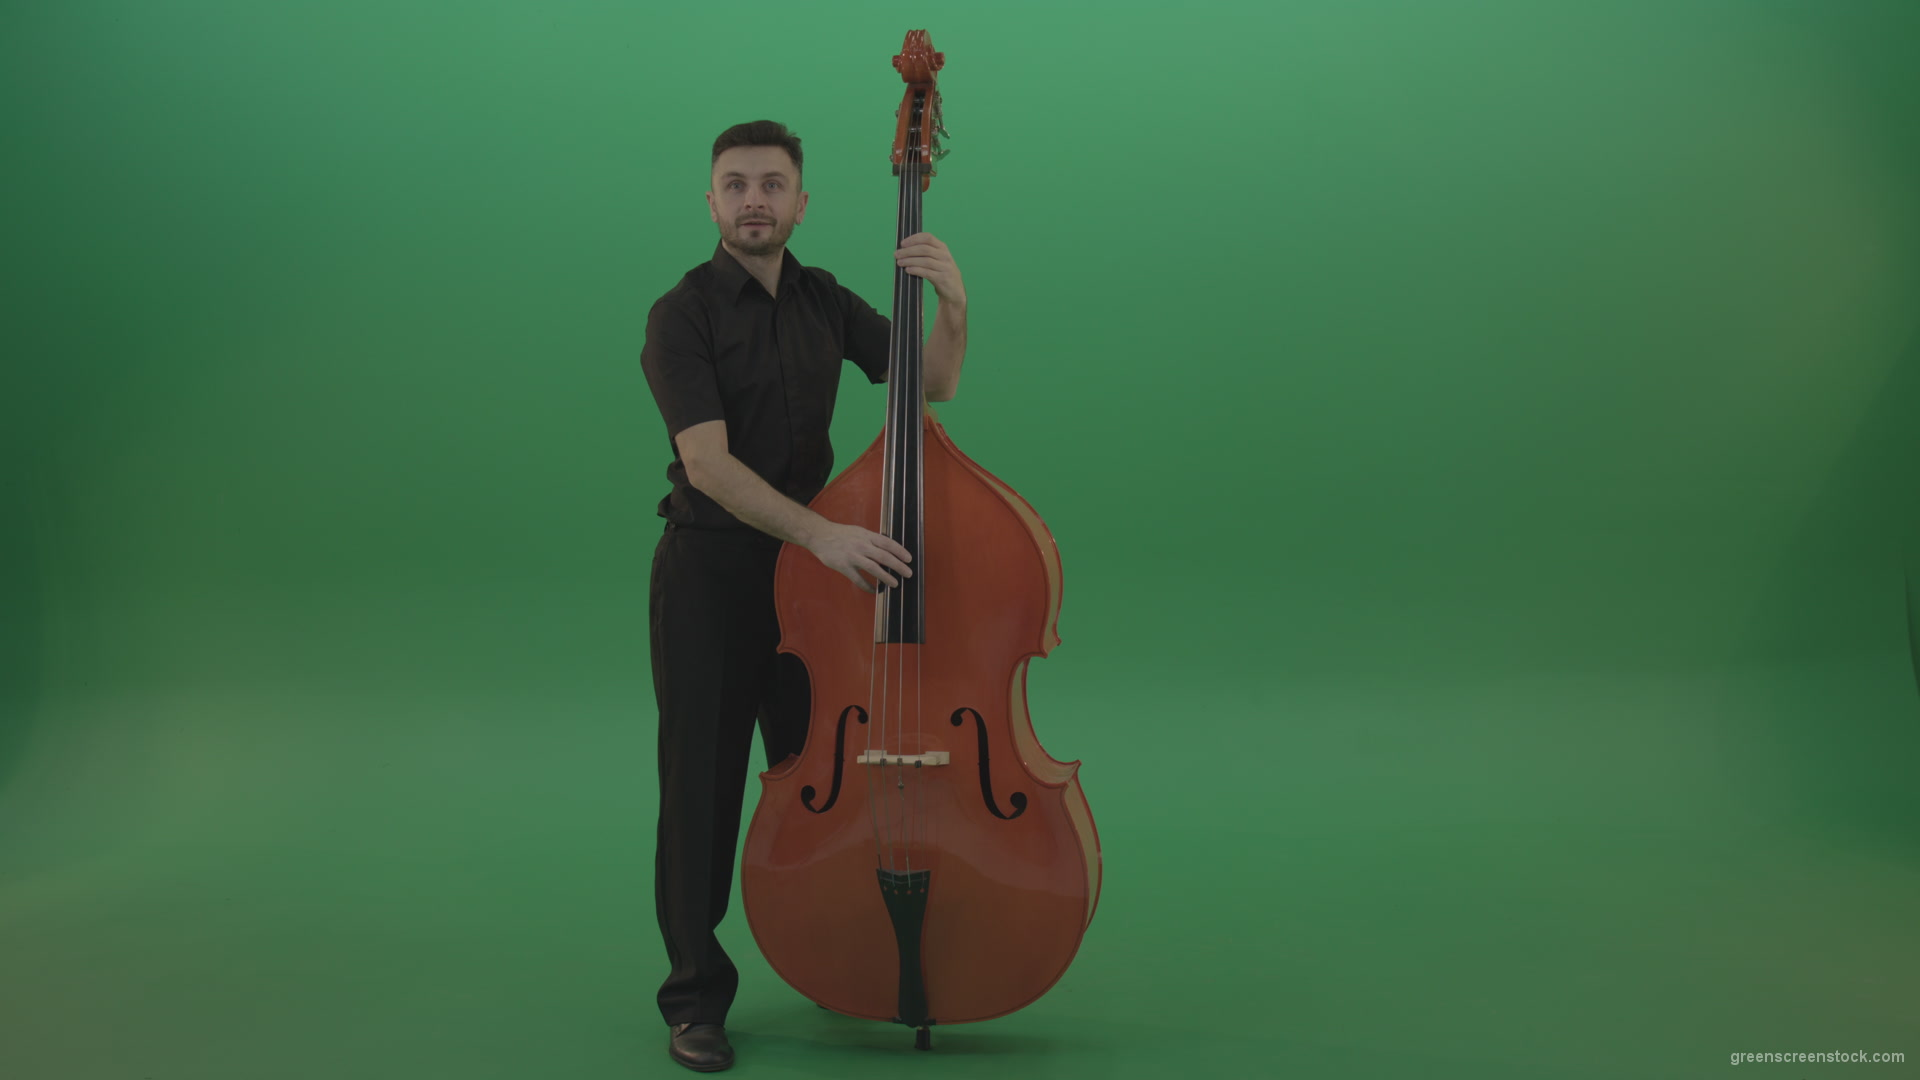 Full-size-man-in-black-uniform-play-jazz-rock-on-double-bass-String-music-instrument-isolated-on-green-screen_001 Green Screen Stock